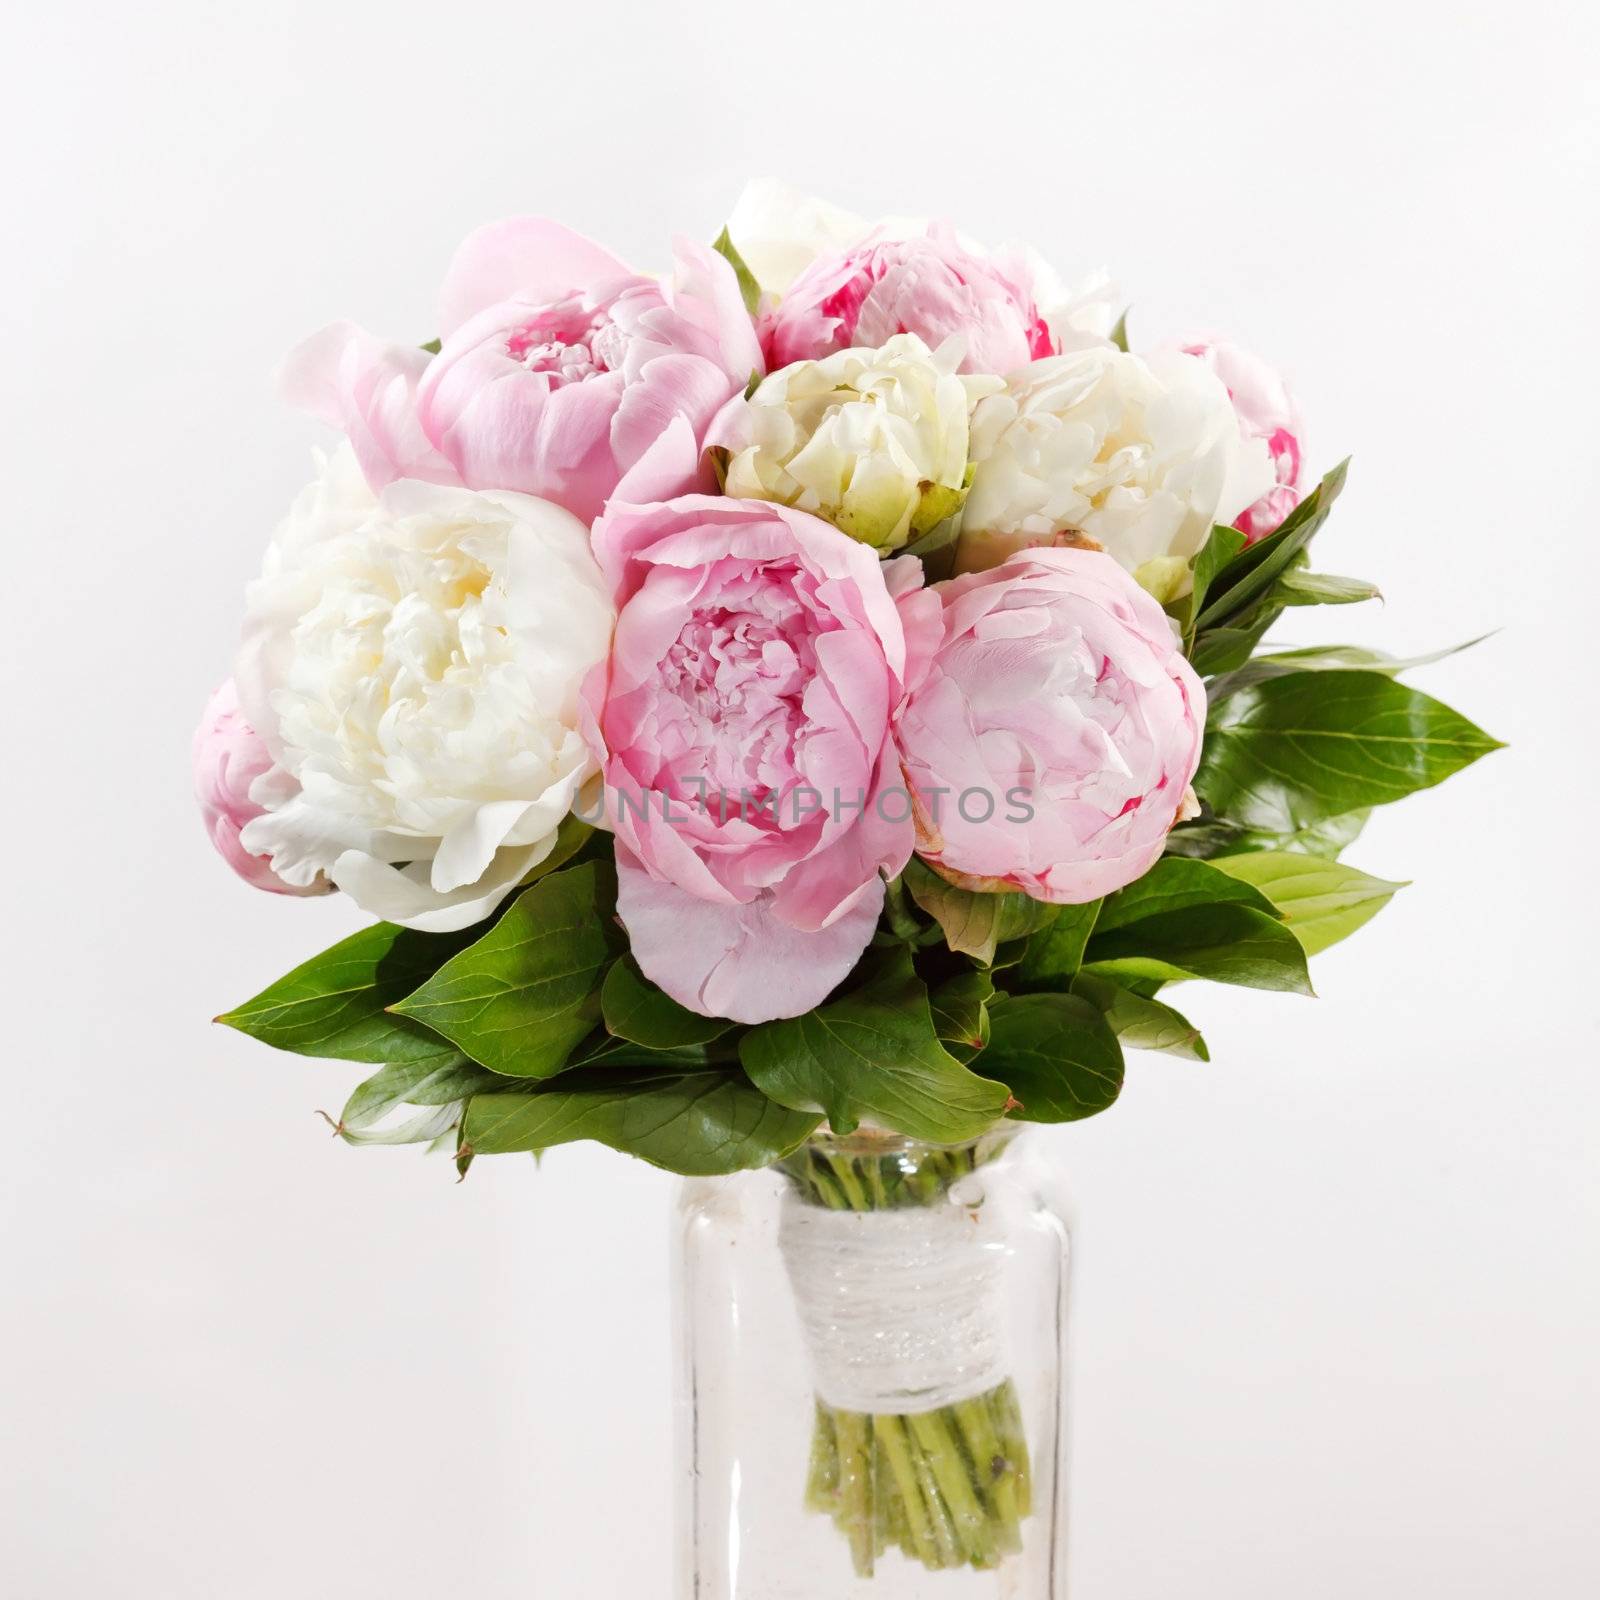 Rich bunch of peonies by shebeko